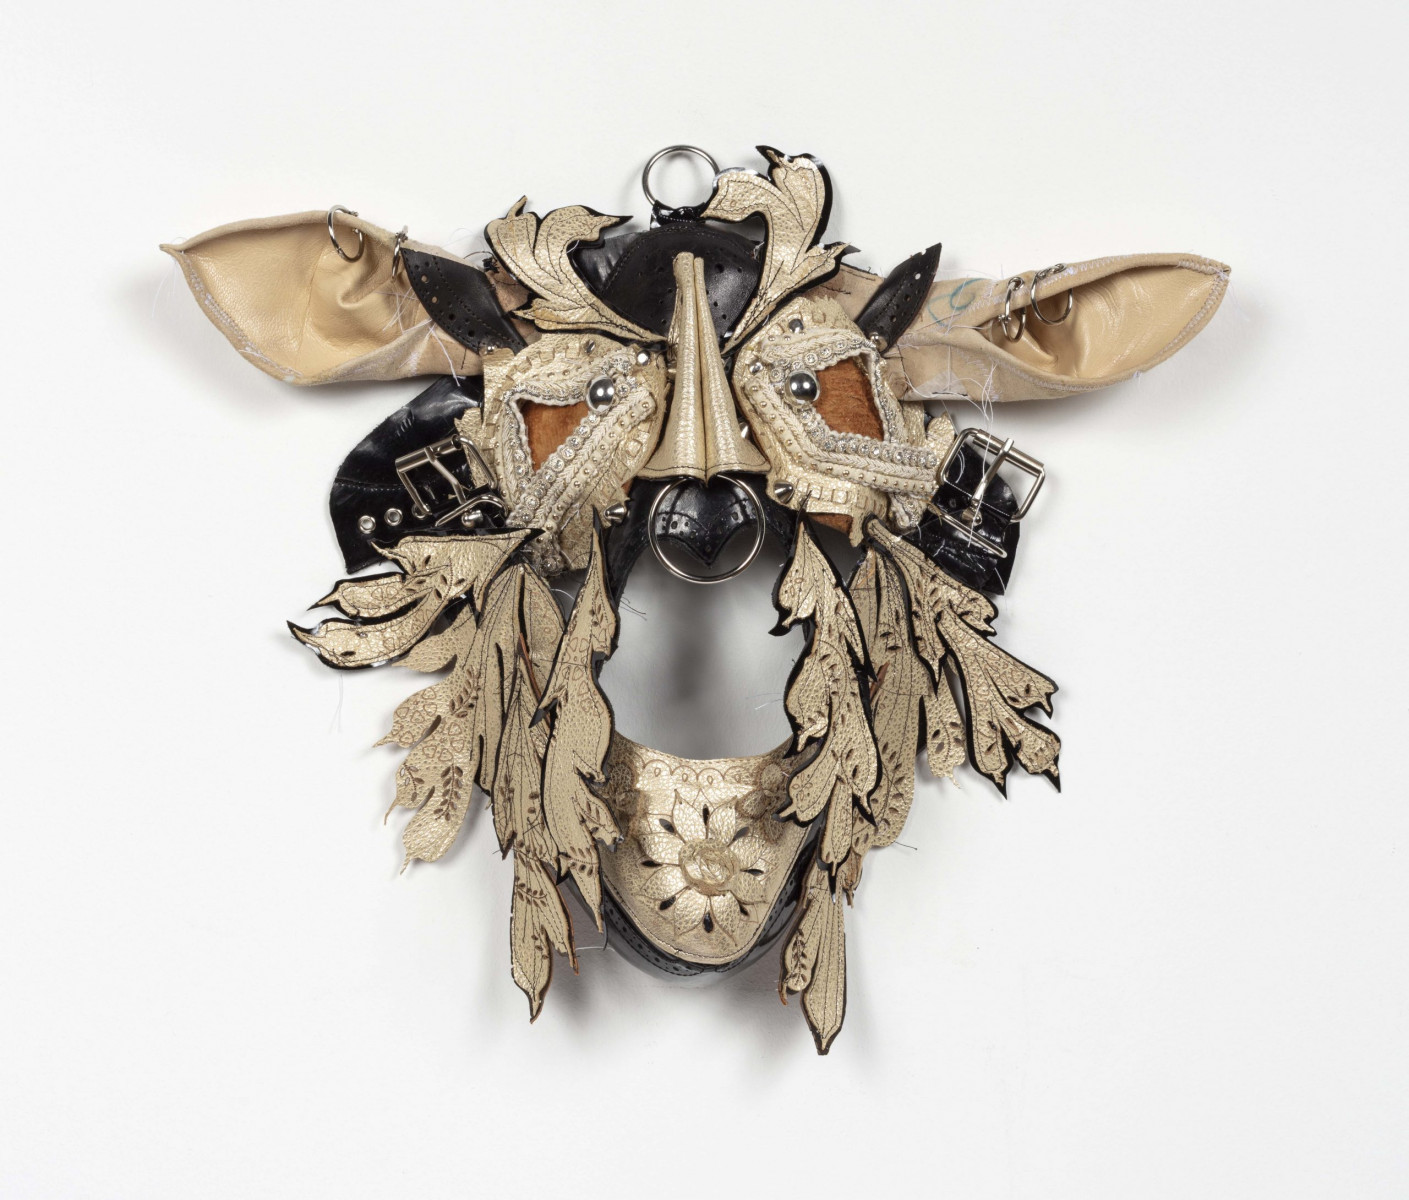 Jakob Rowlinson. <em>Mask VIII (Endymion Turned)</em>, 2023. Punched leather, buckles, rings, studs, eyelets and trimmings, 12 x 15 x 3 7/8 inches (30.5 x 38.1 x 9.8 cm)